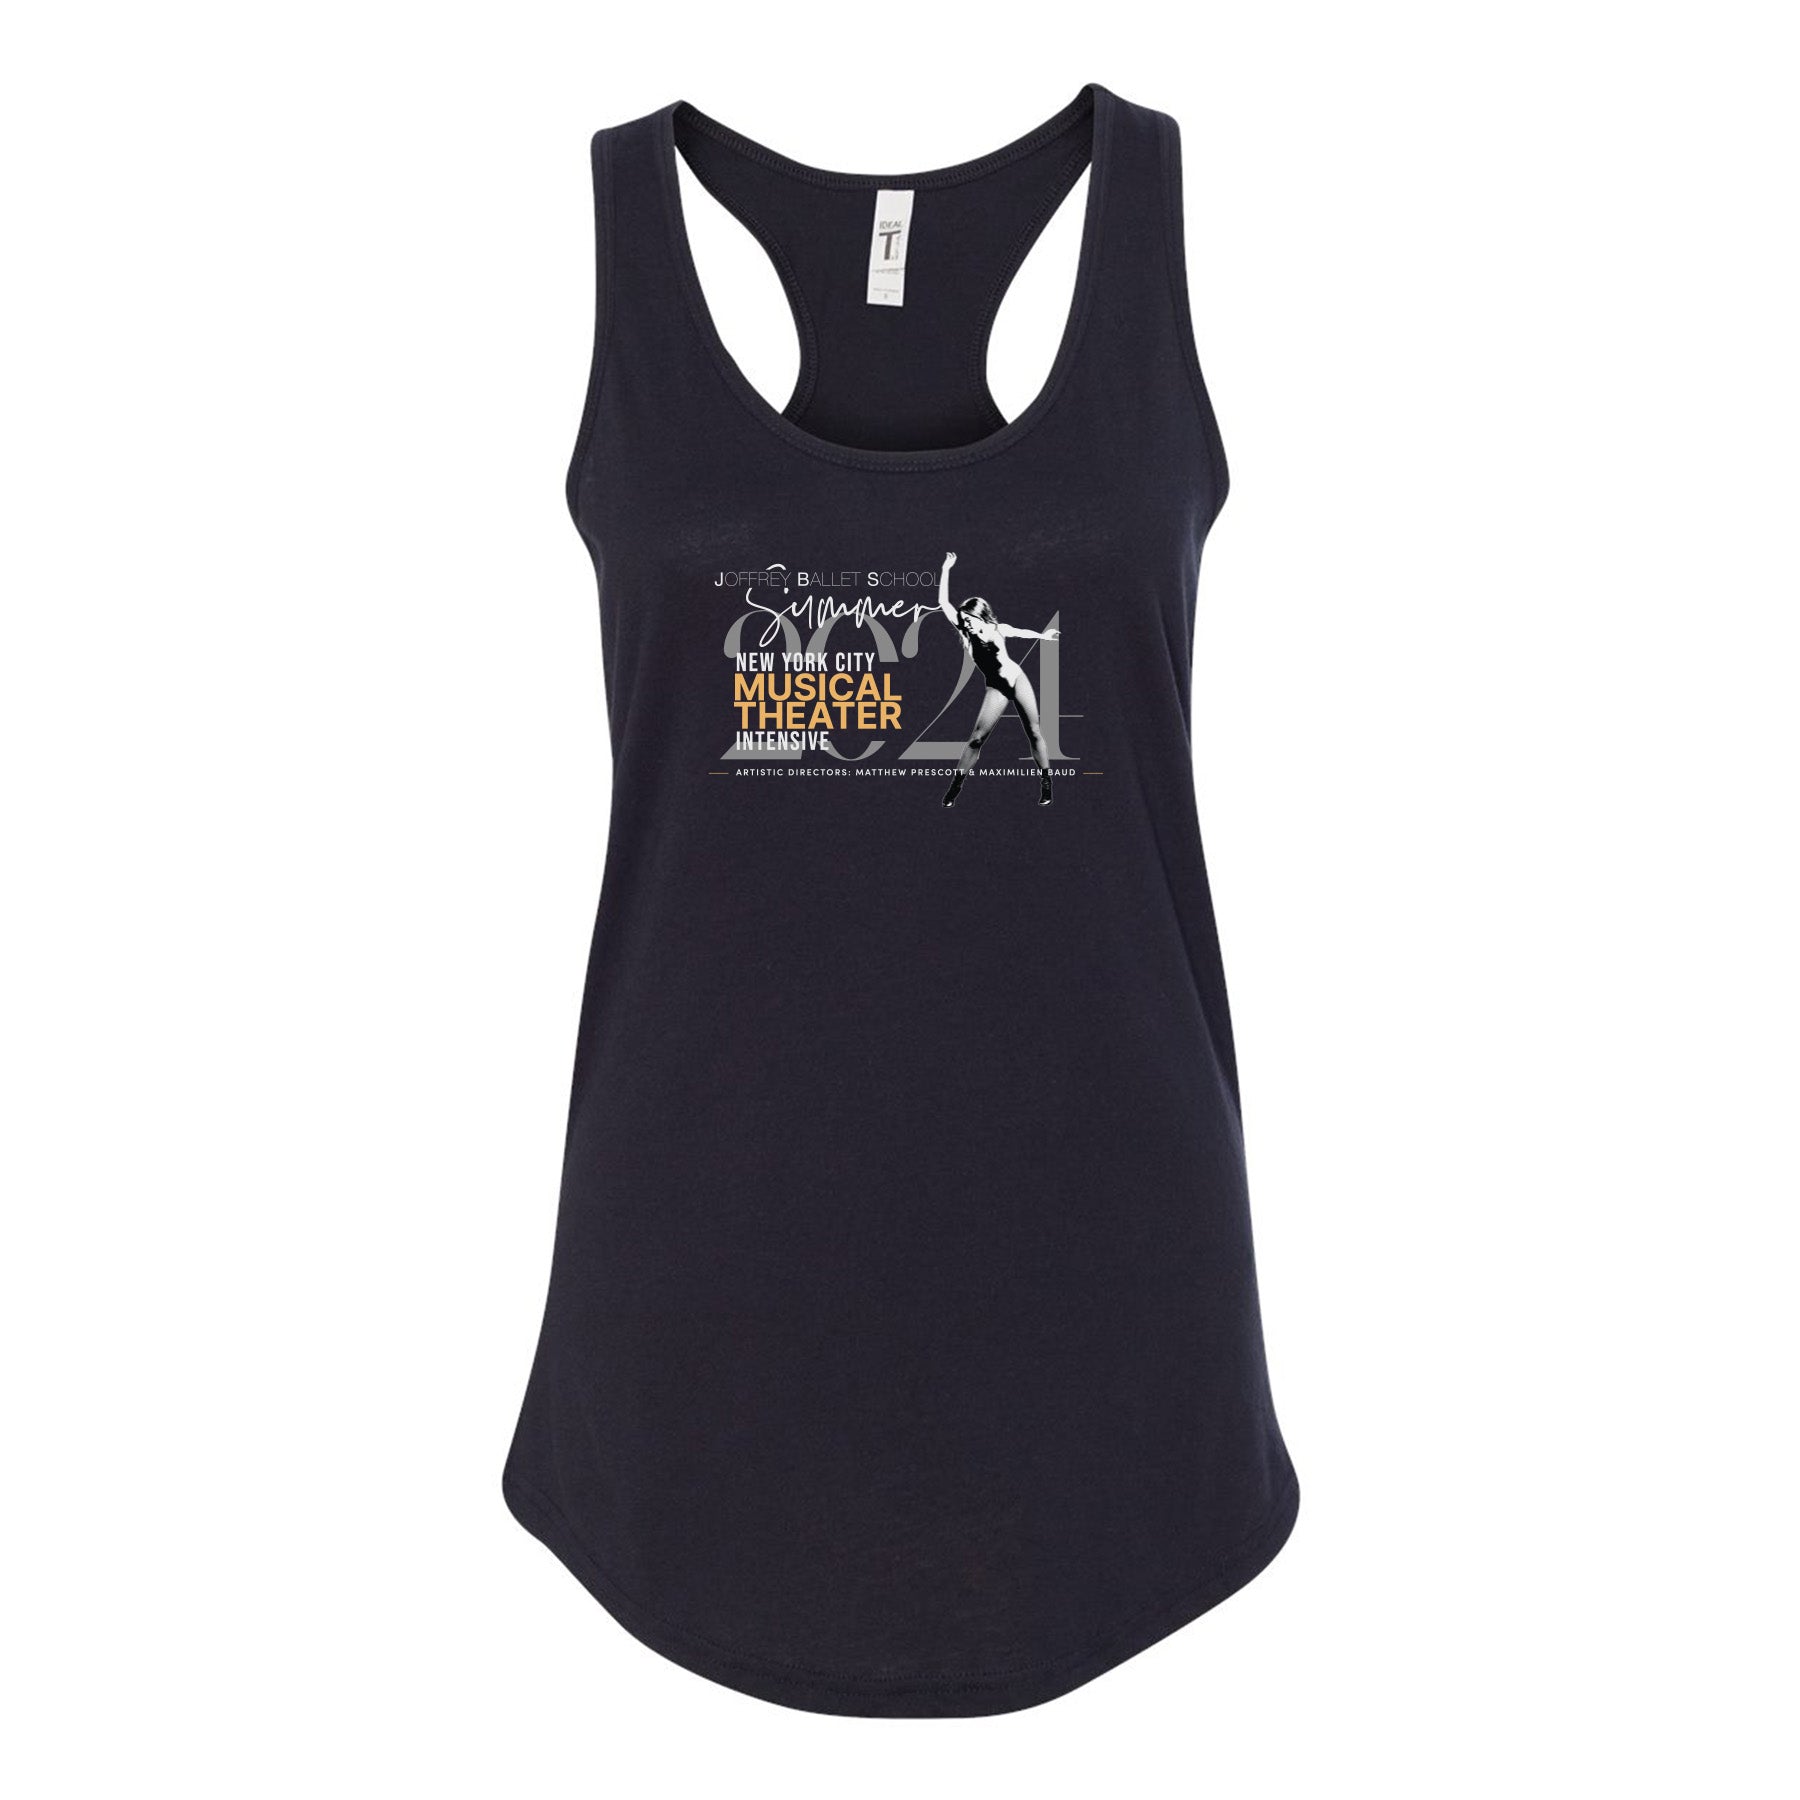 Joffrey NYC Musical Theatre Intensive Racer Back Tank